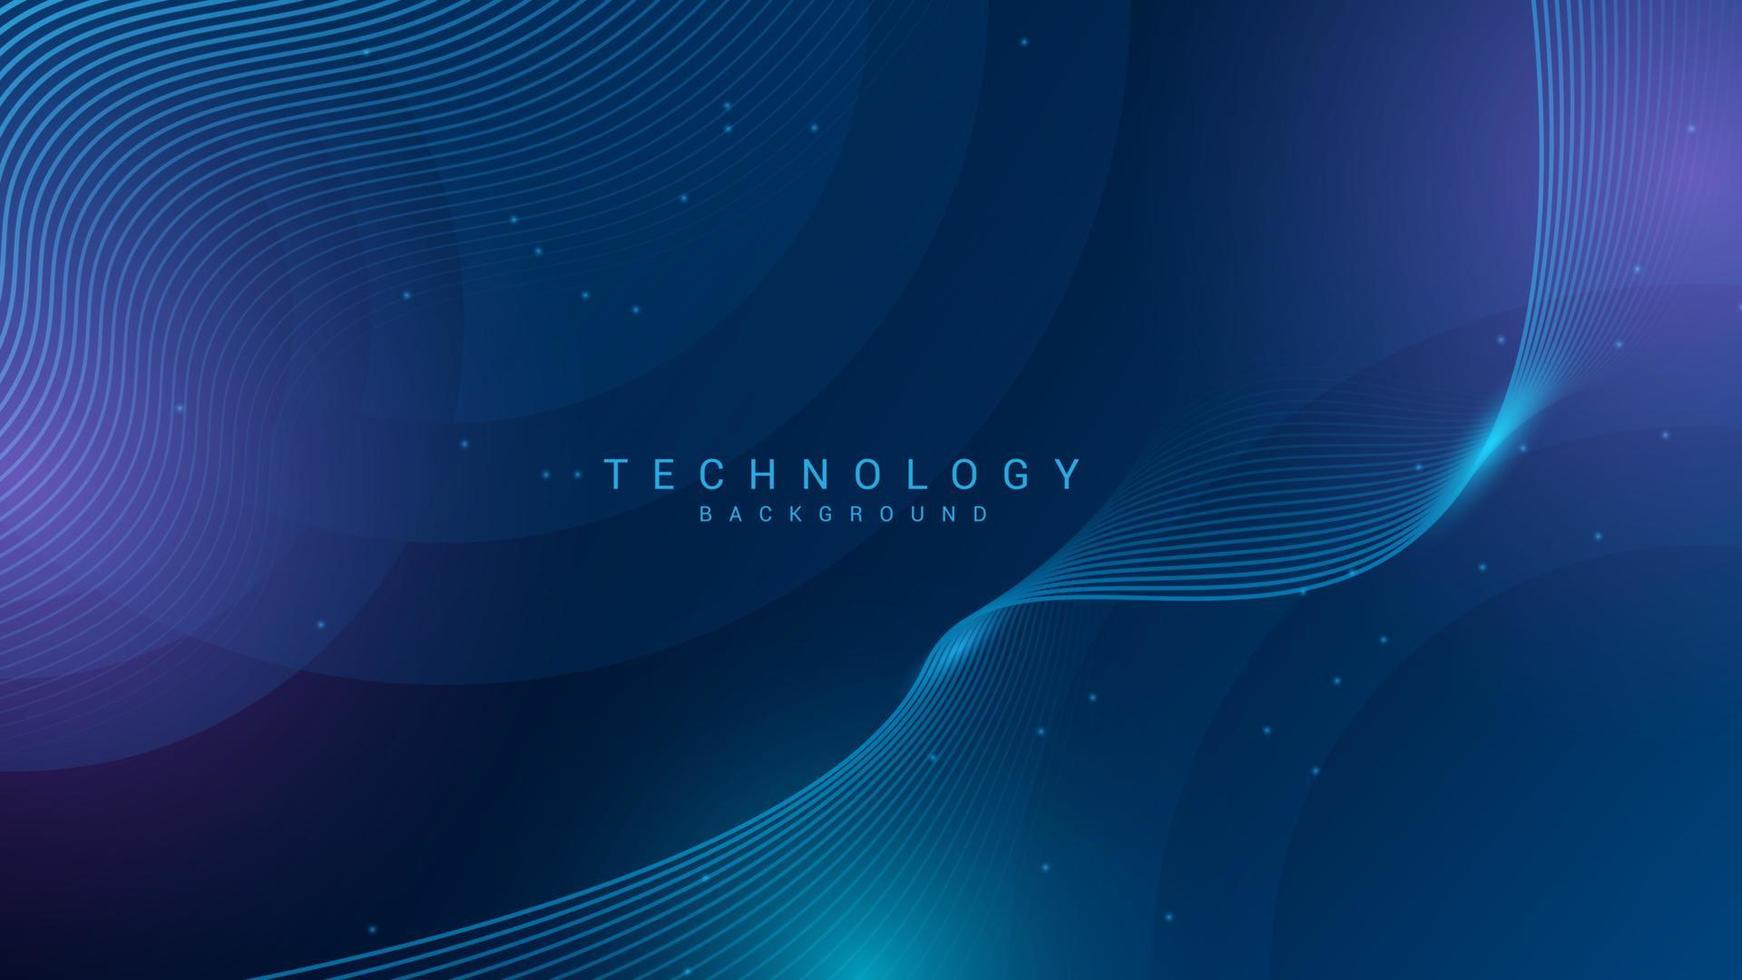 Abstract technology background with wave shapes vector